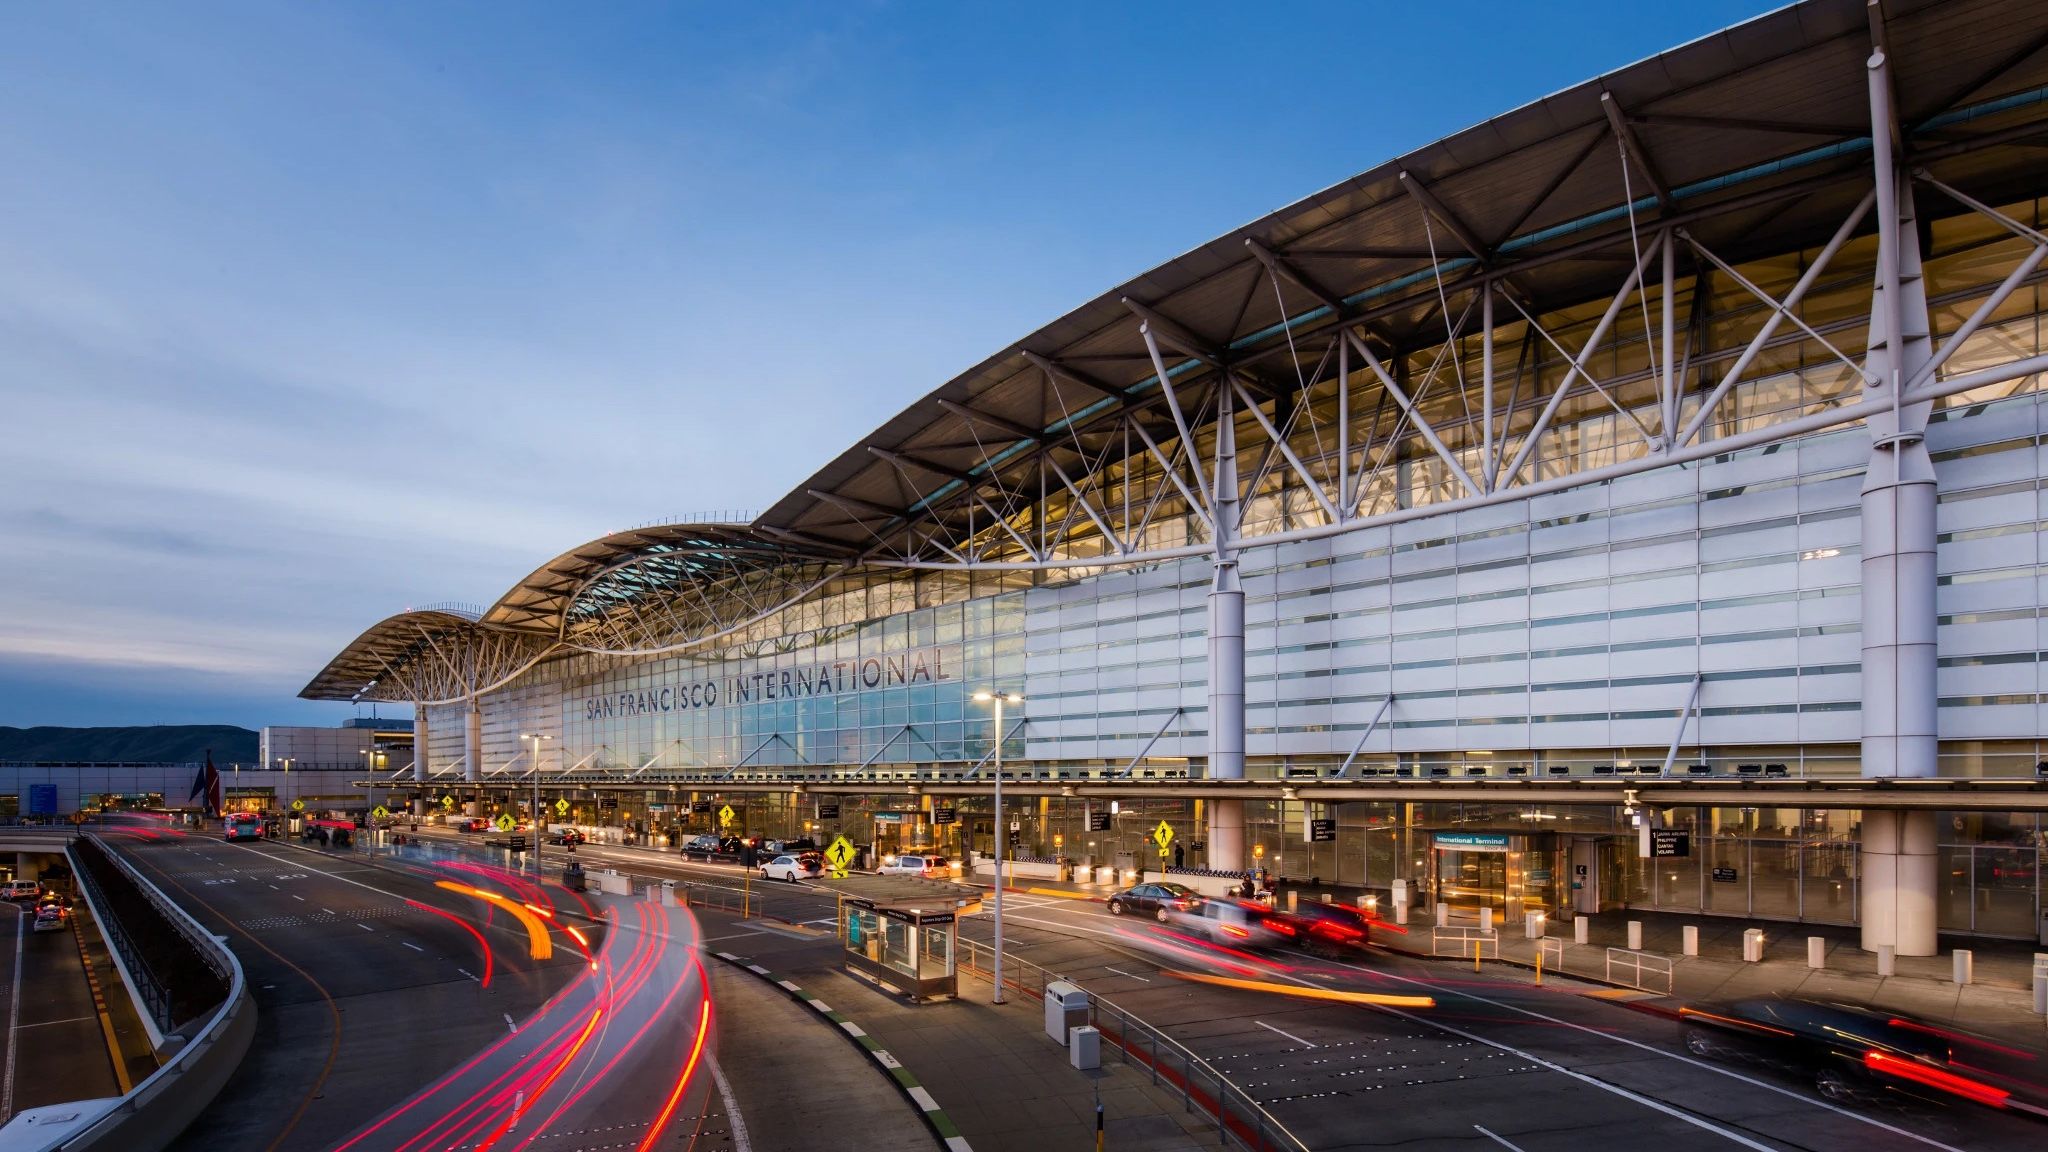 5 Things You Didn’t Know About San Francisco International Airport